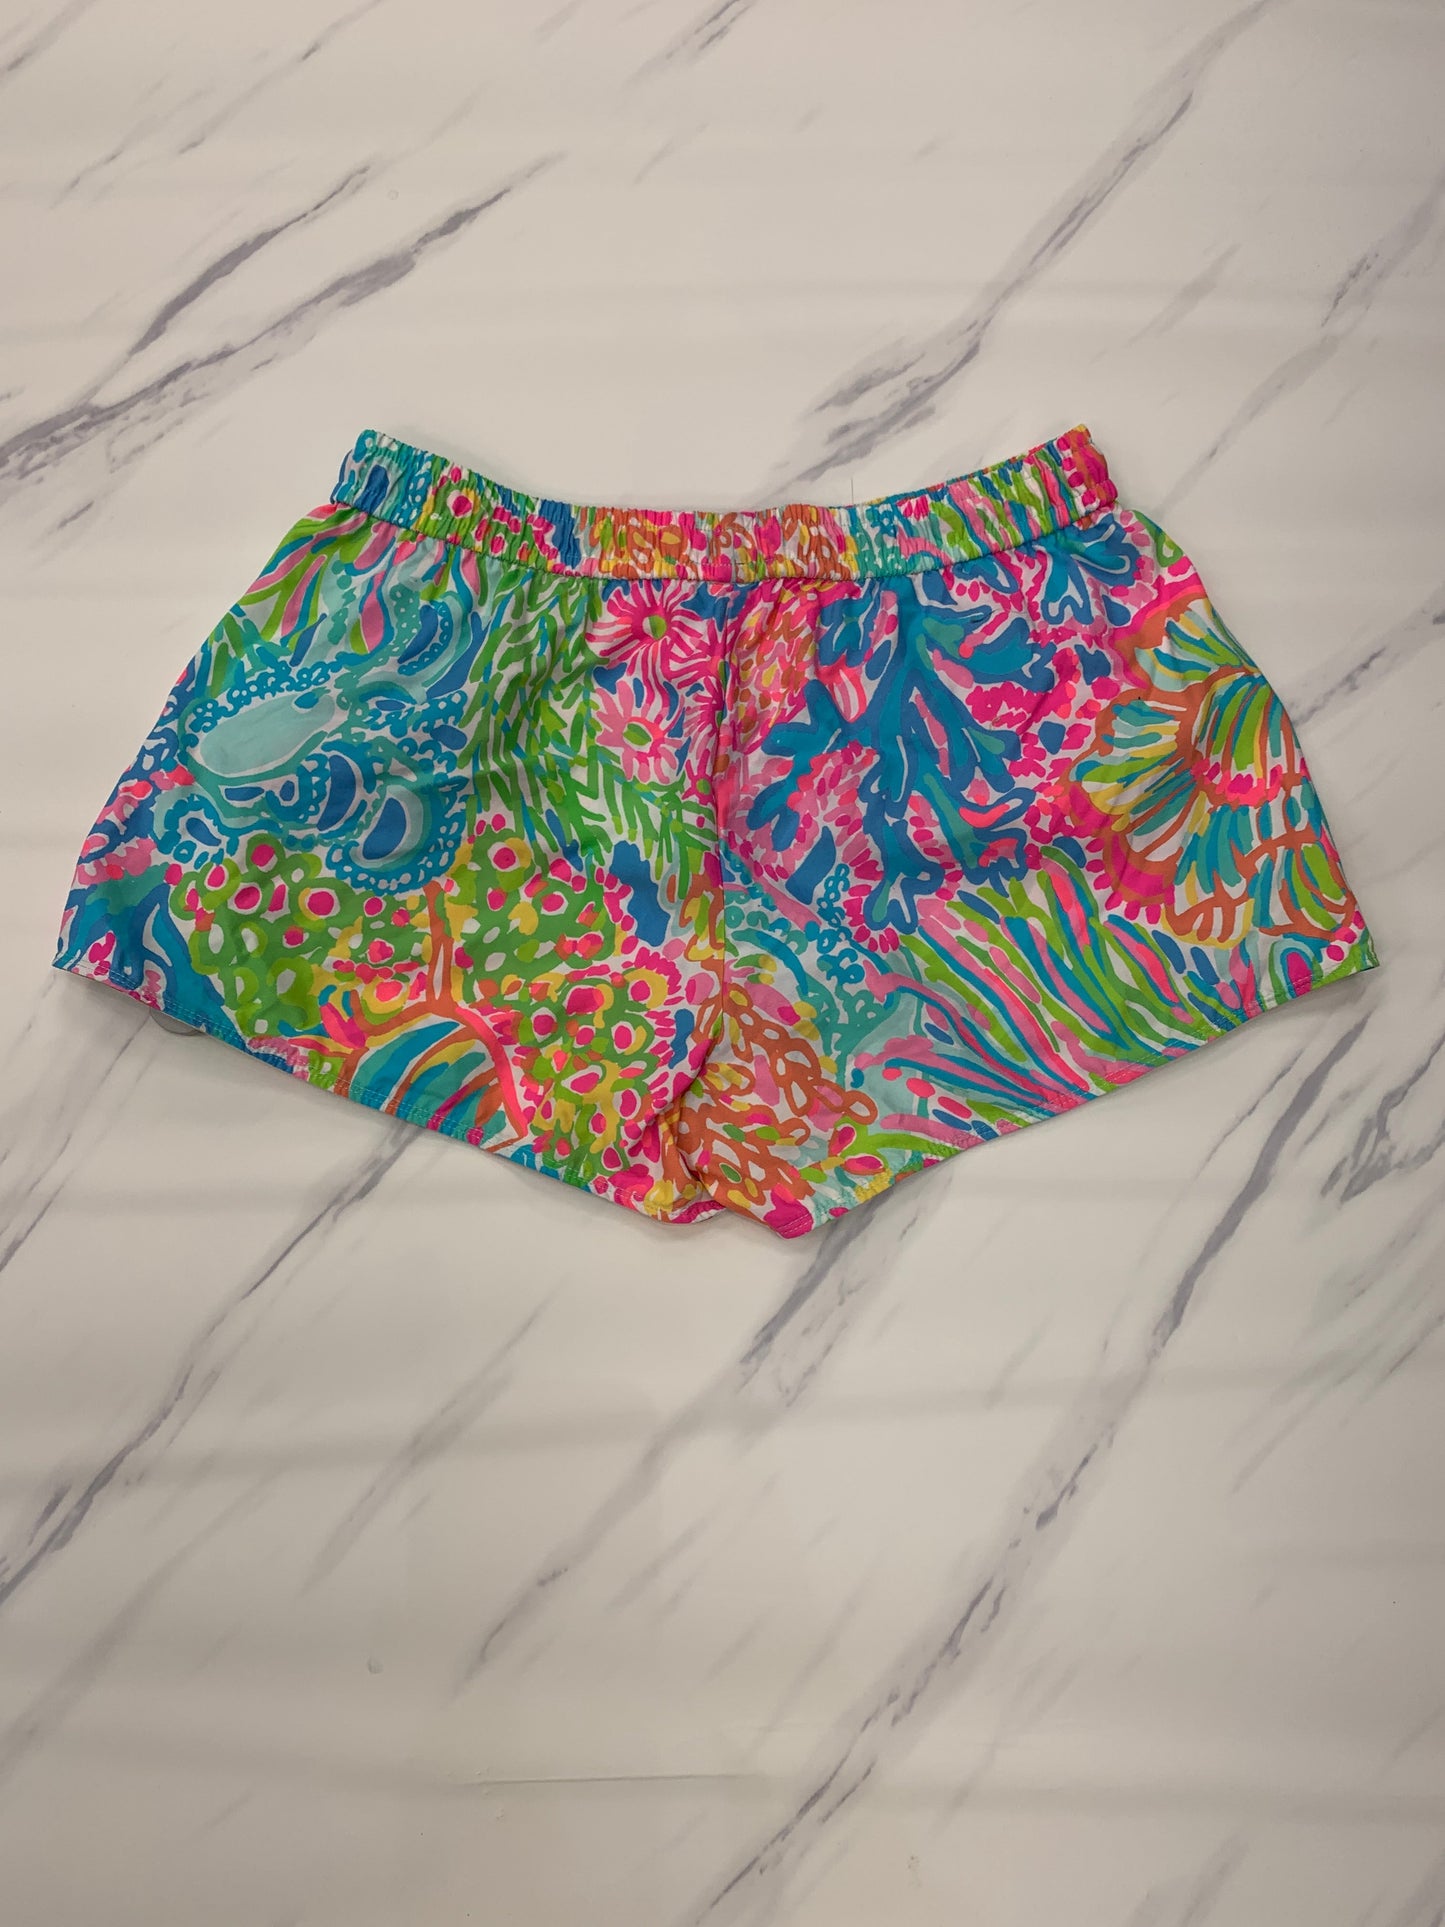 Athletic Shorts Lilly Pulitzer, Size M